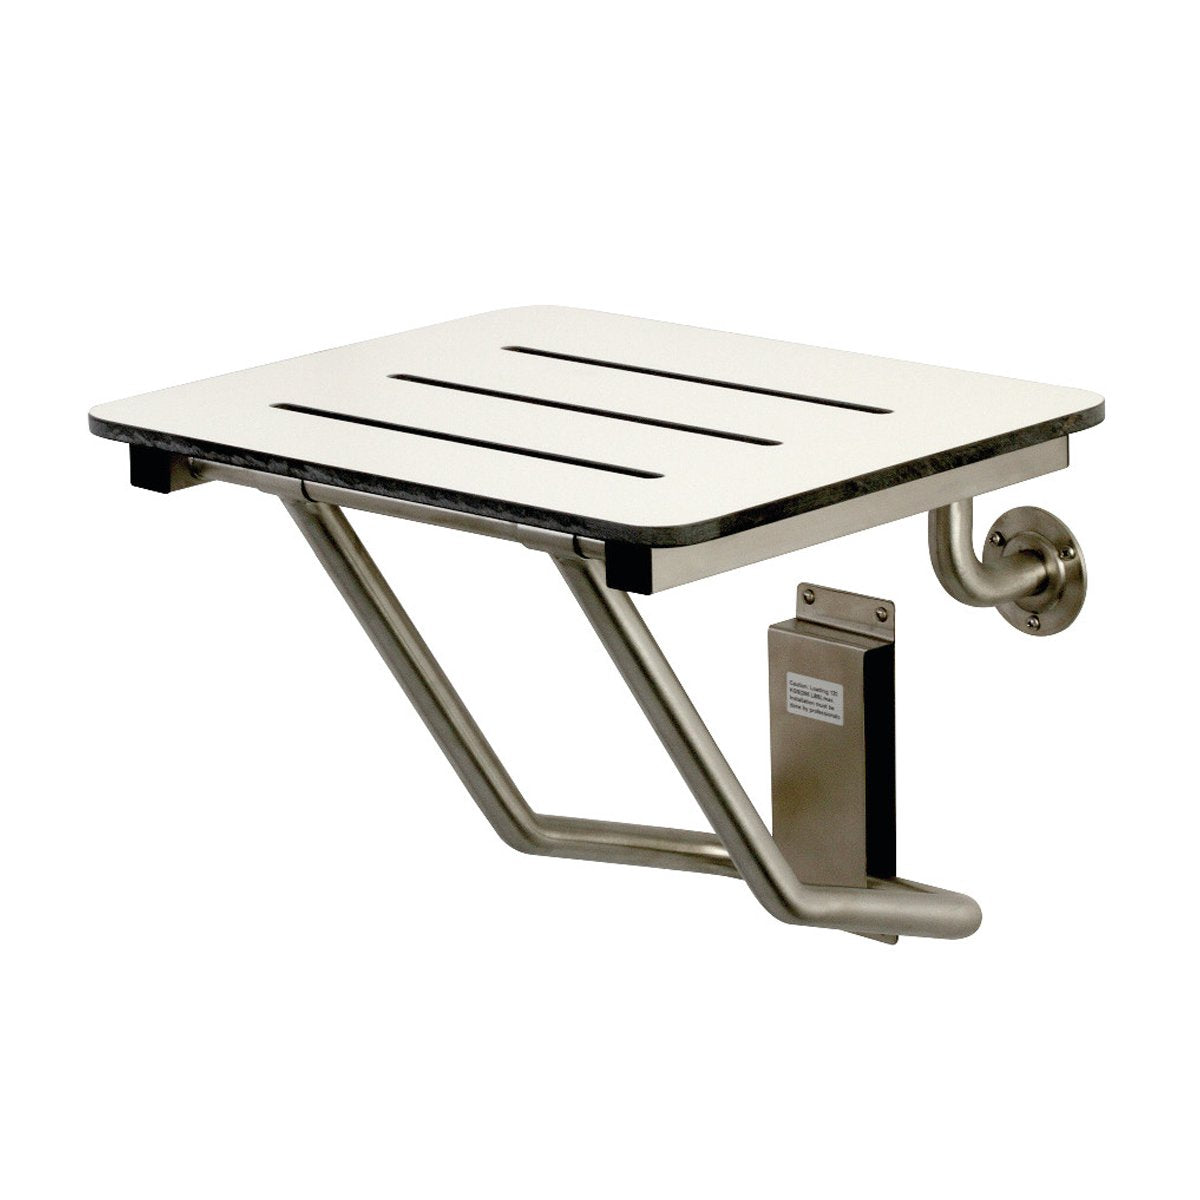 Kingston Brass Adascape 18" x 16" Wall Mount Fold Down Shower Seat in Brushed Stainless Steel